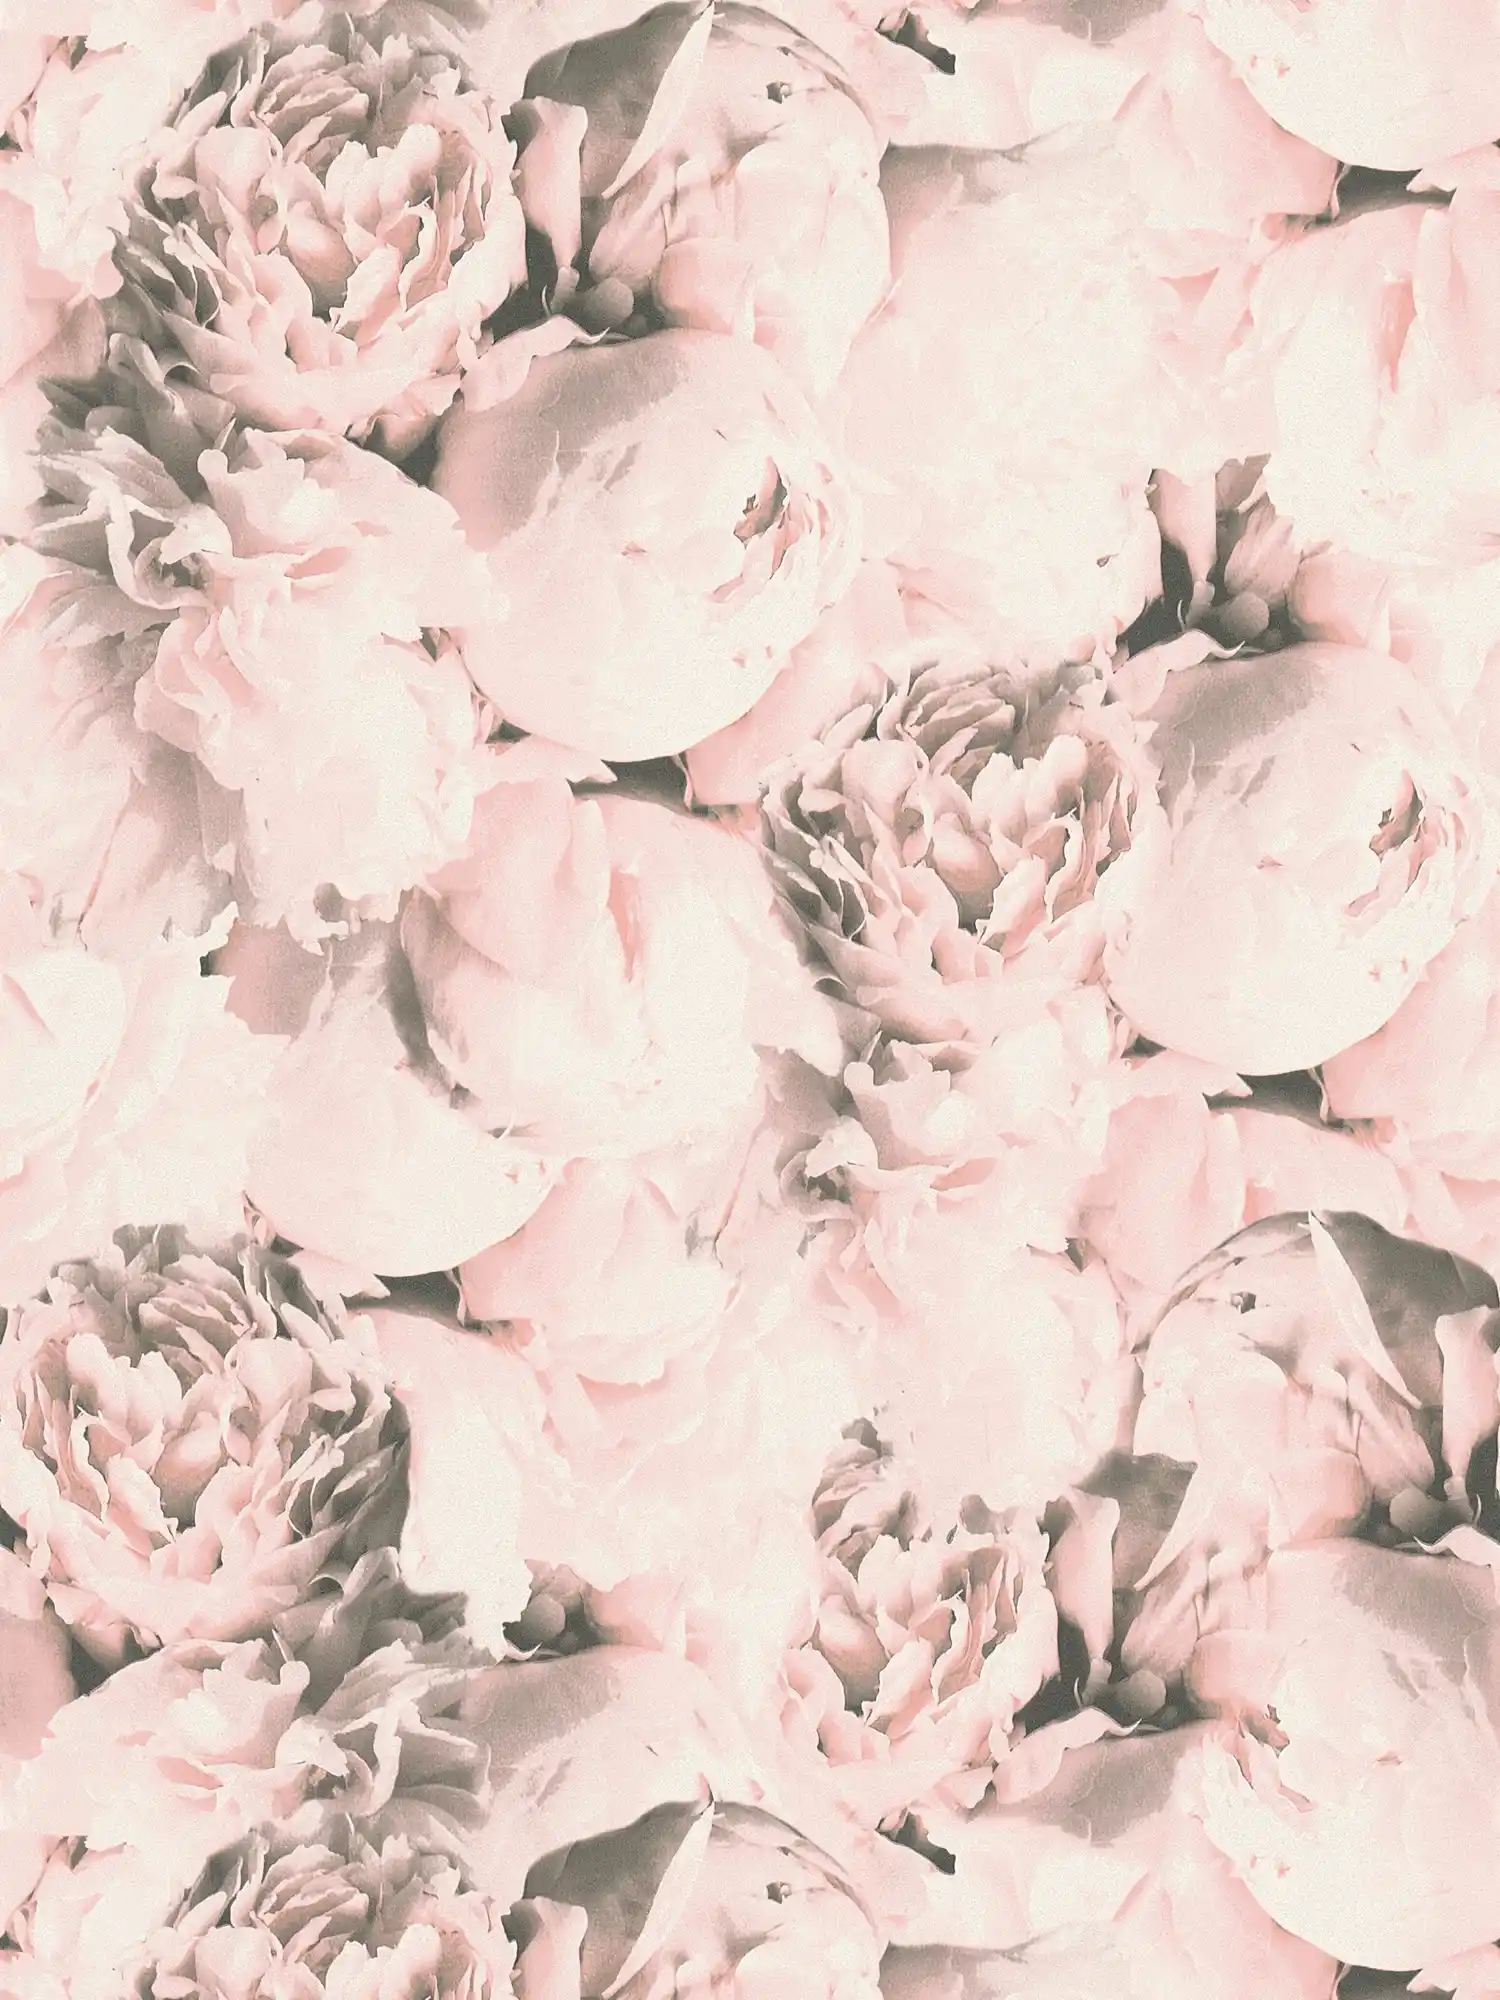 Floral wallpaper roses with shimmer effect - pink, cream
